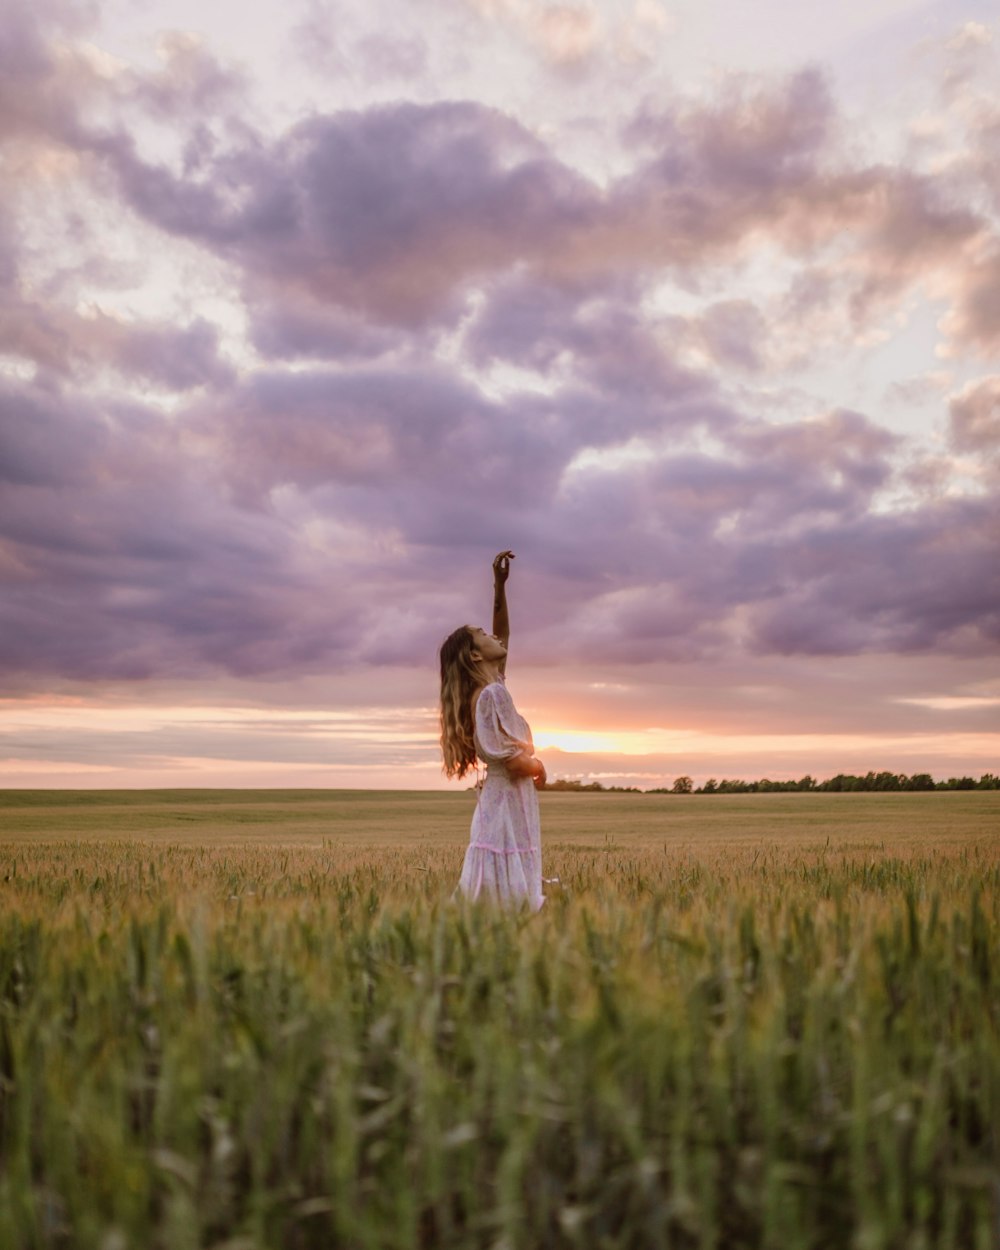 woman in white dress standing on green grass field under cloudy sky during daytime